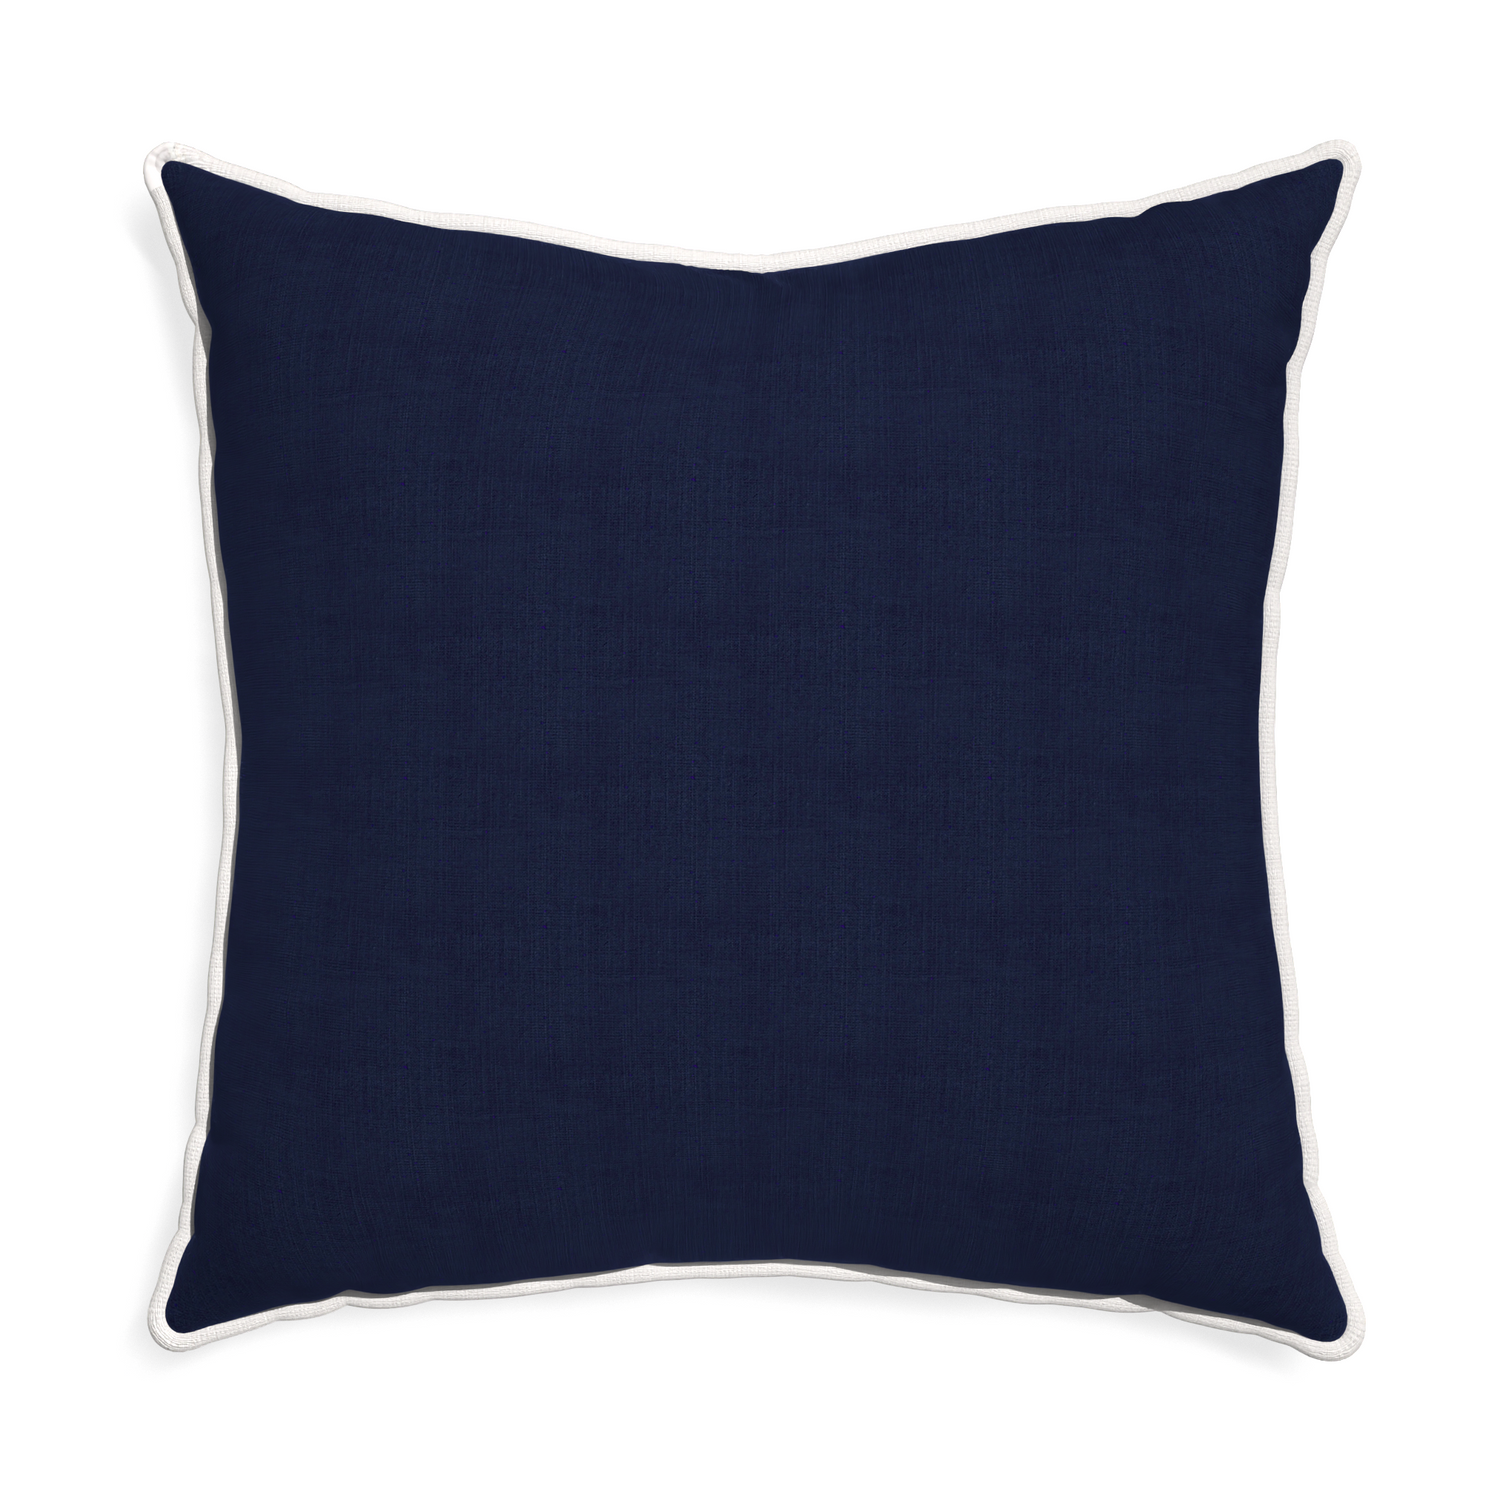 Euro-sham midnight custom pillow with snow piping on white background